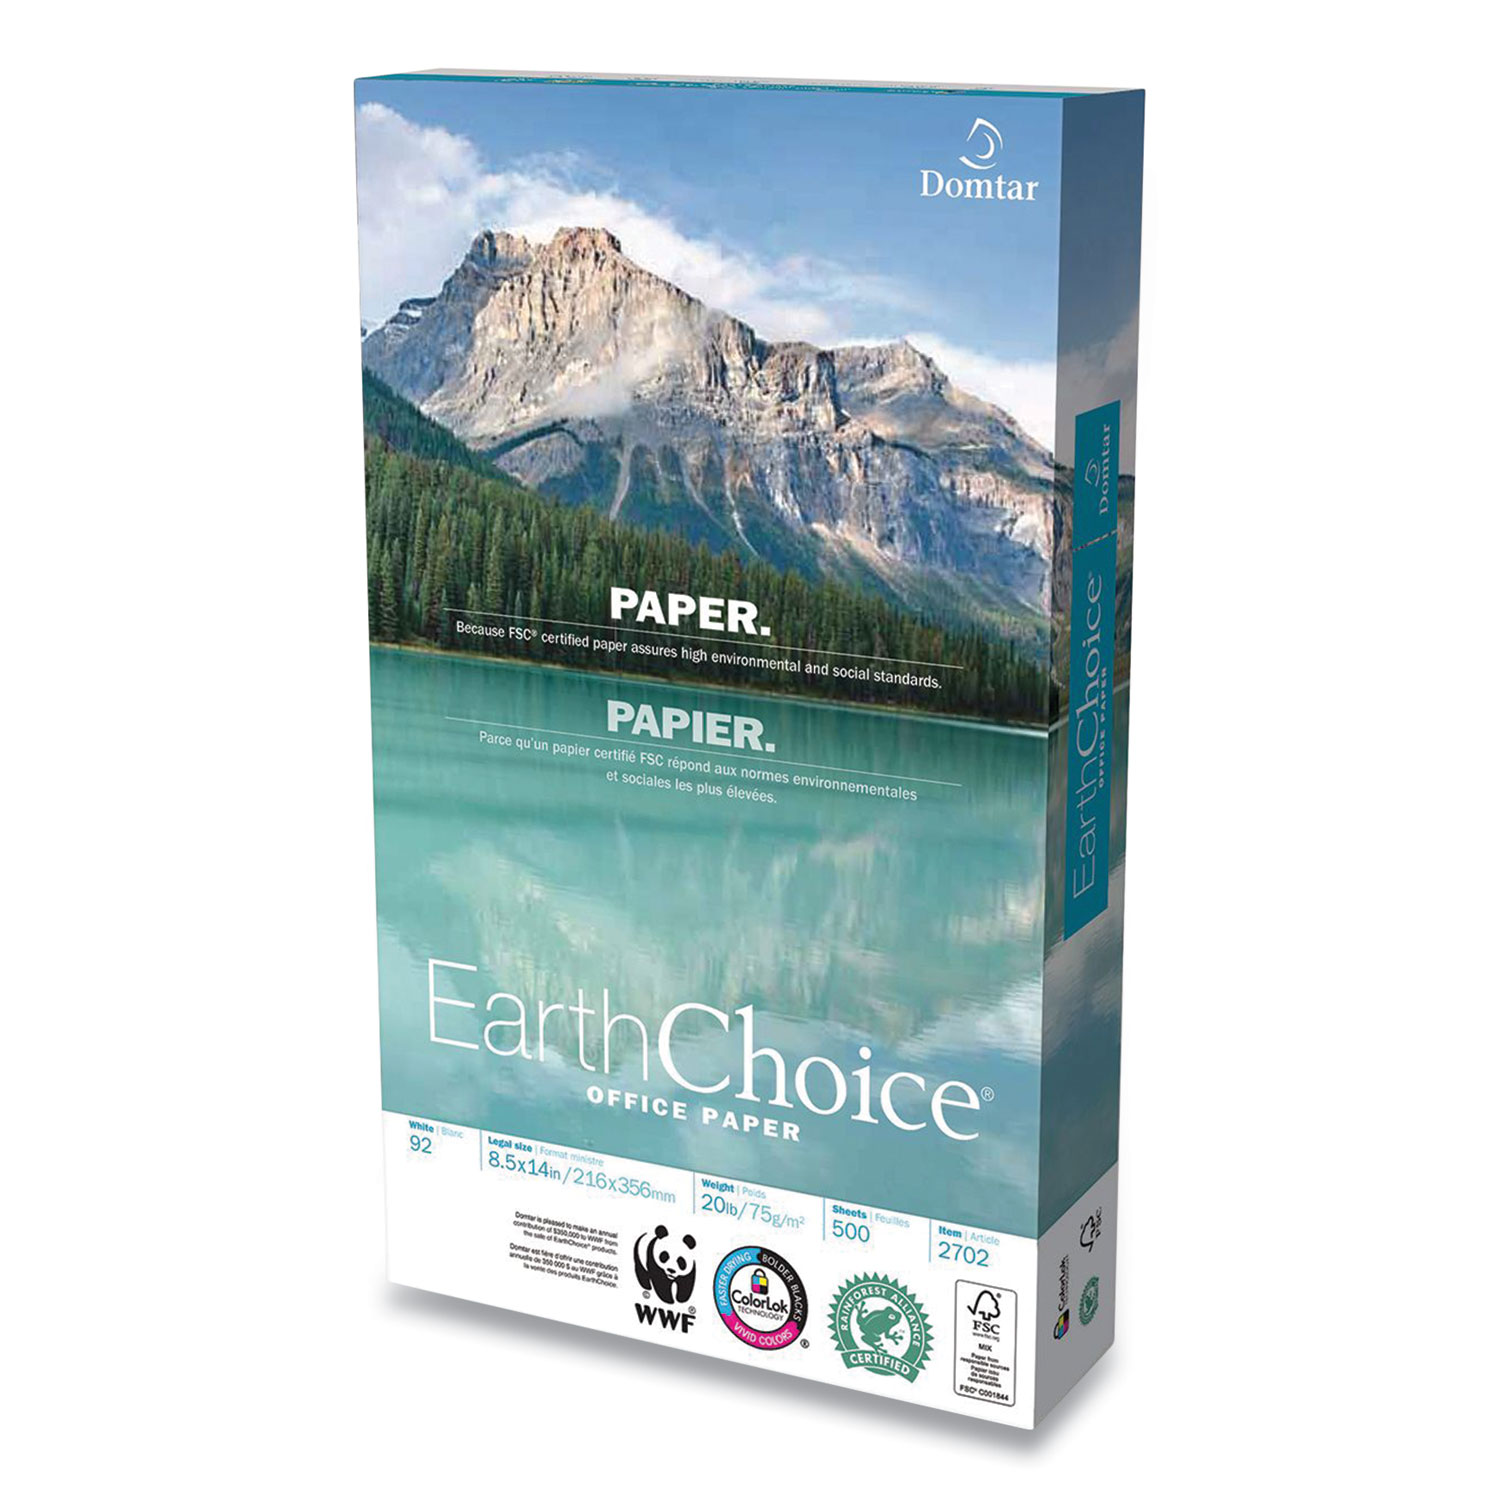  Domtar 2702 EarthChoice Office Paper, 92 Bright, 20 lb, 8.5 x 14, White, 500/Ream (DMR707952) 